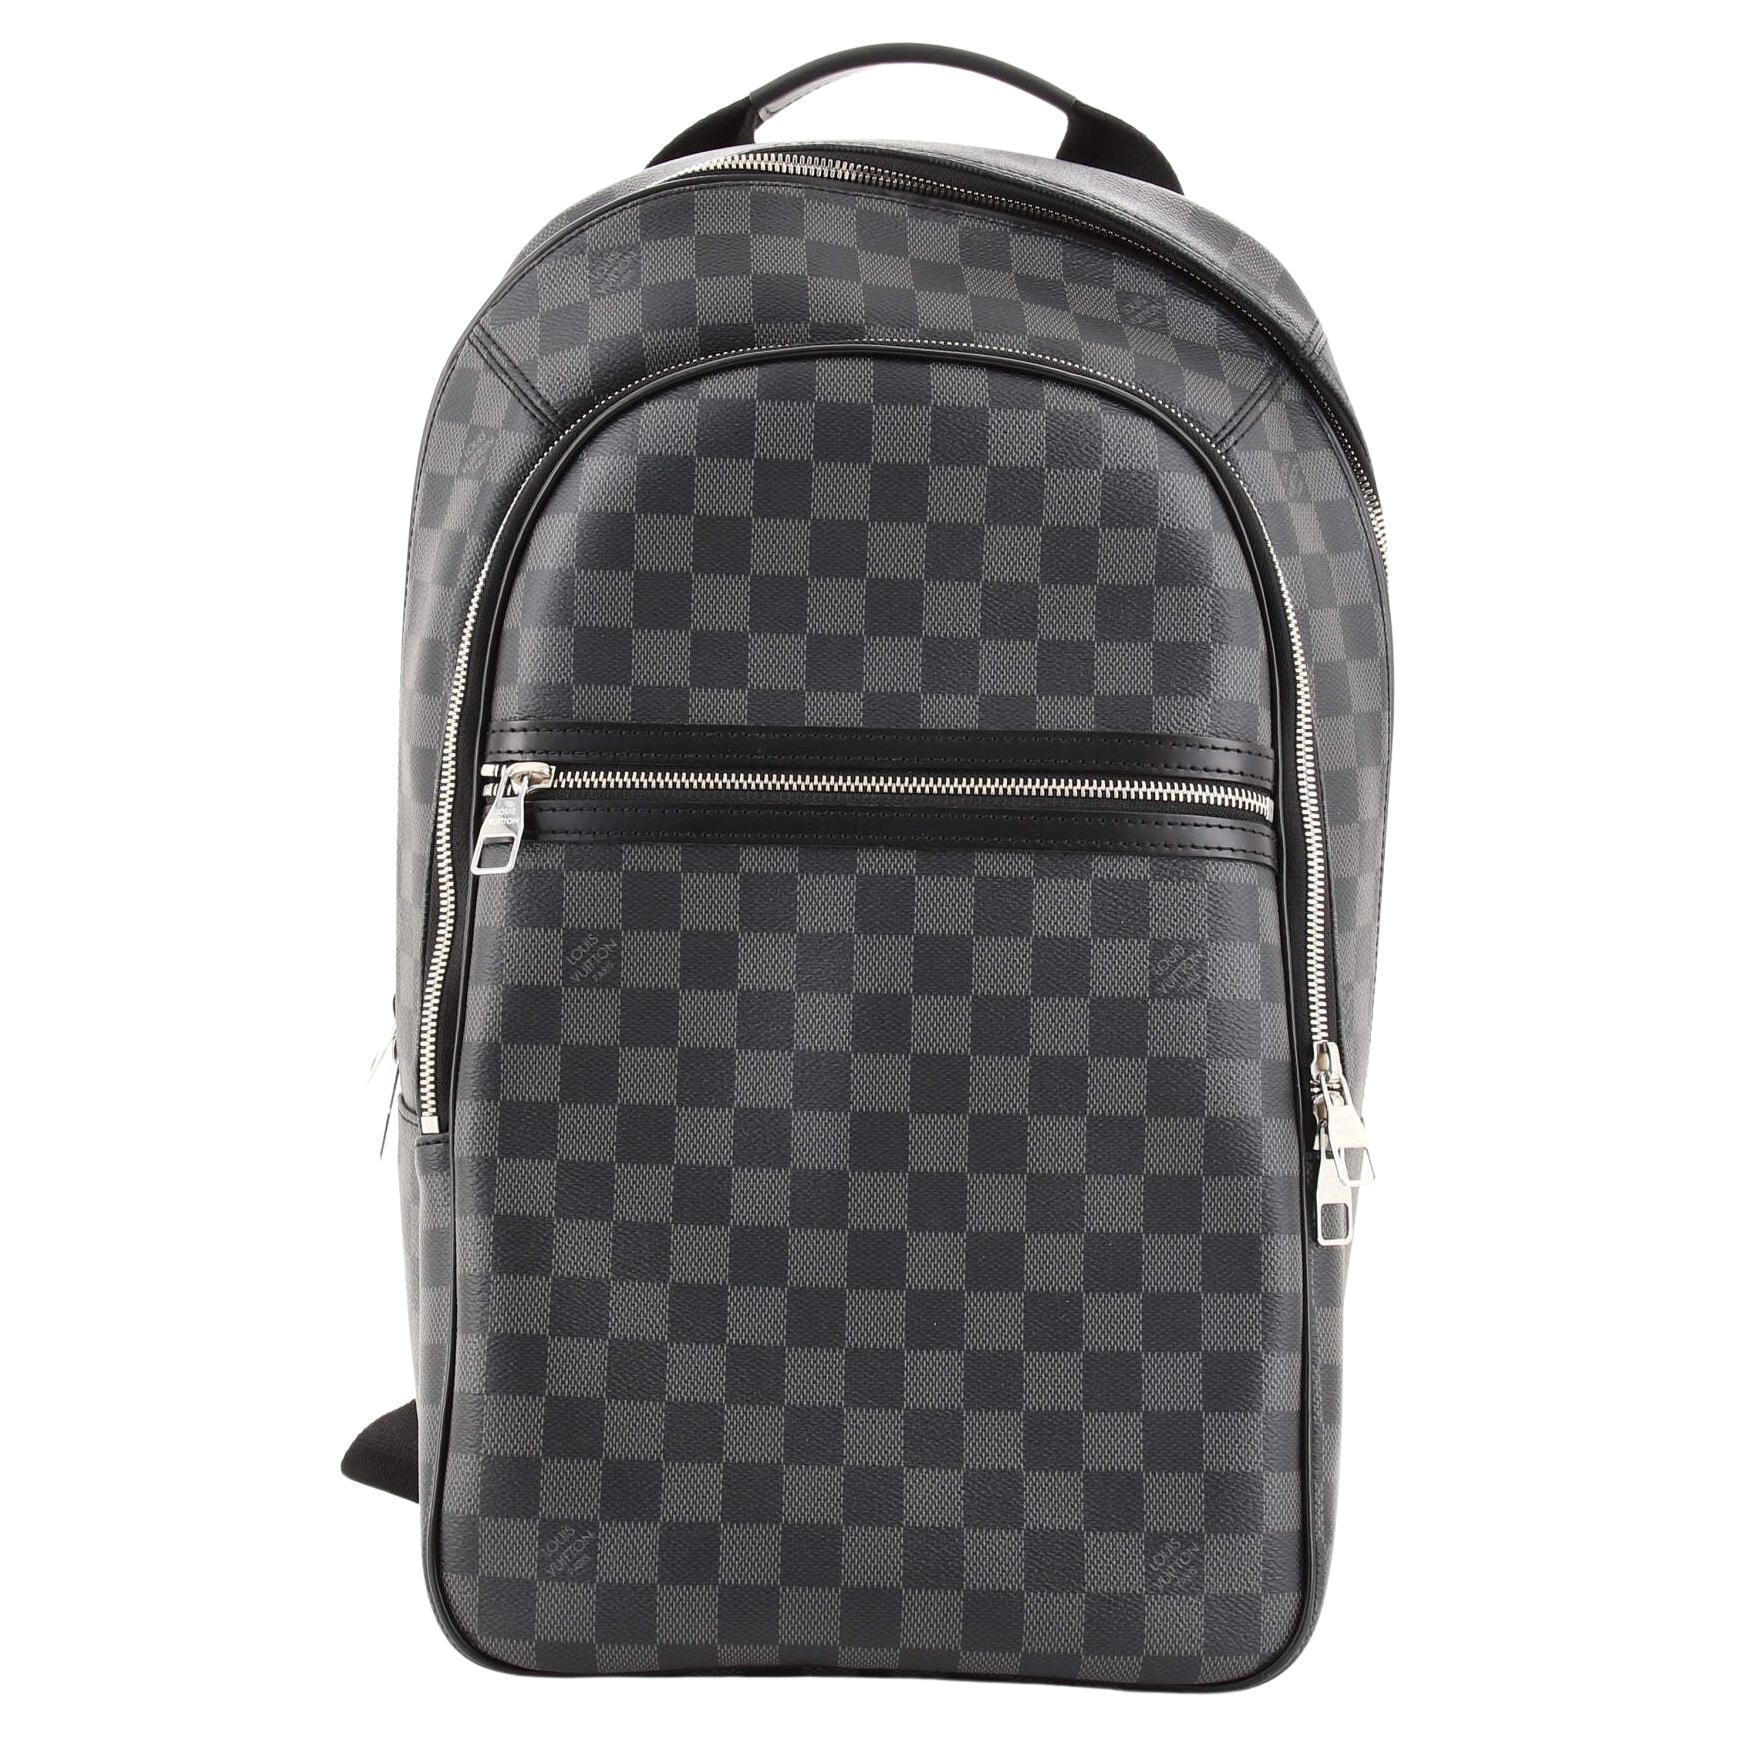 Shopping >damier graphite michael backpack big sale - OFF 64%